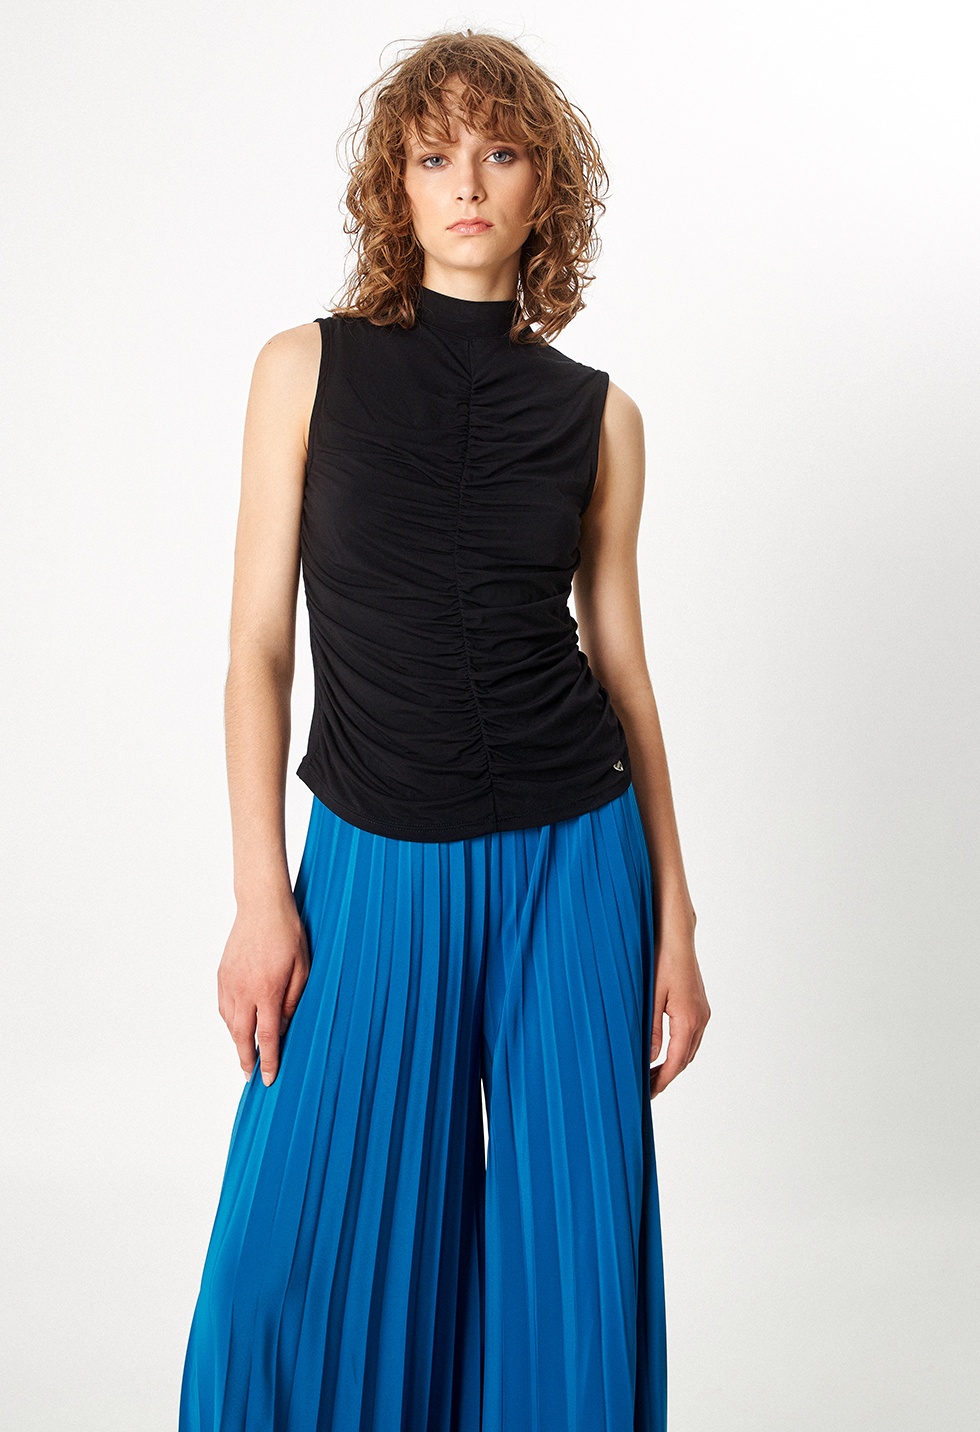 Sleeveless top with gathering